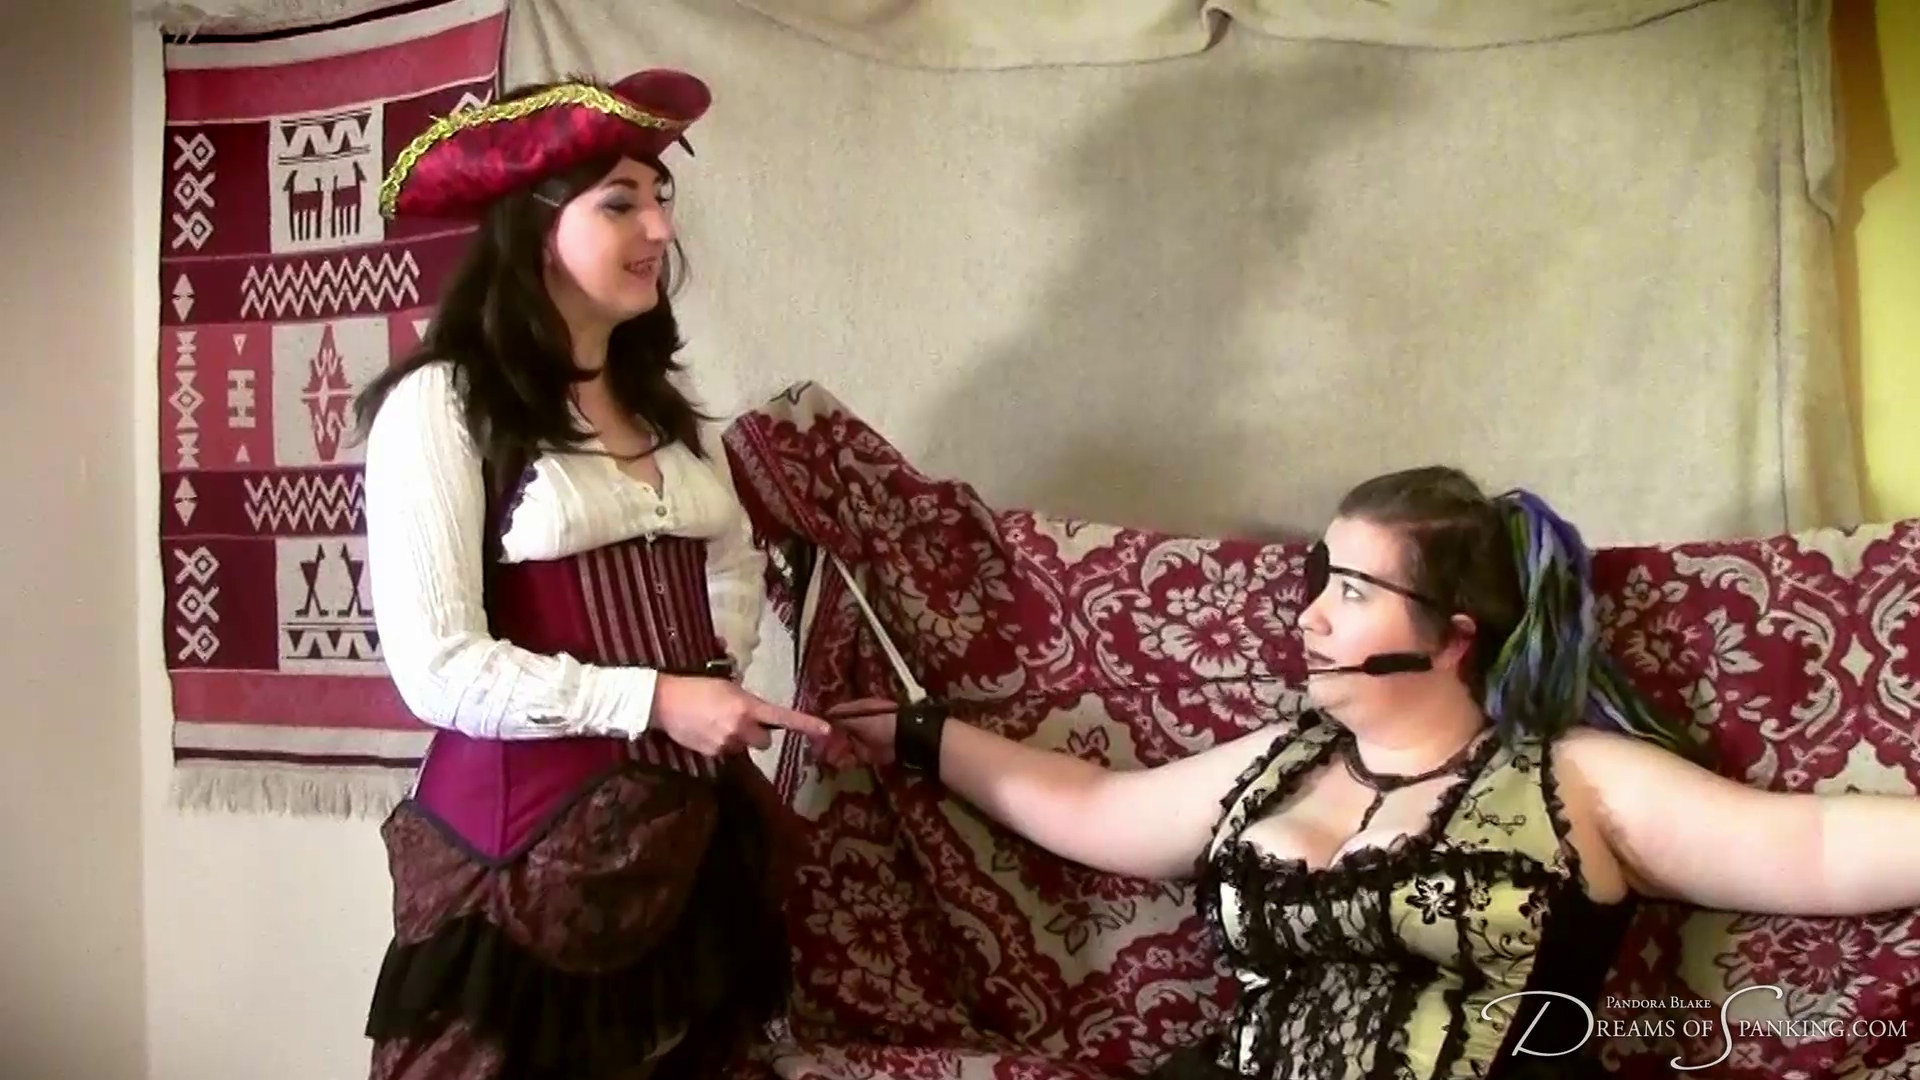 Dreams-of-Spanking_captured-pirate-queen002.jpg